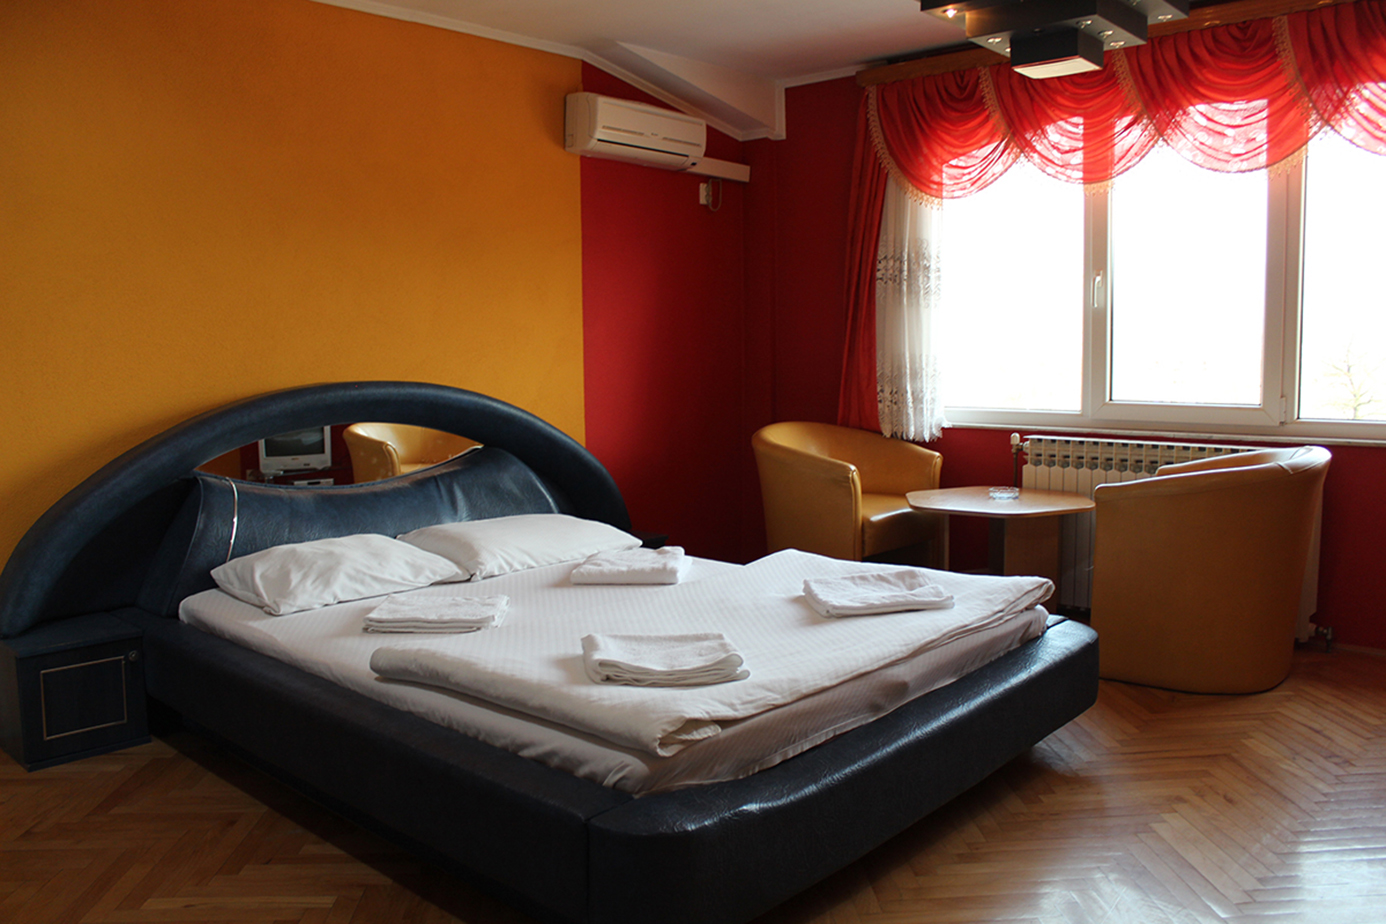 King size bead room for two persons in Visoko